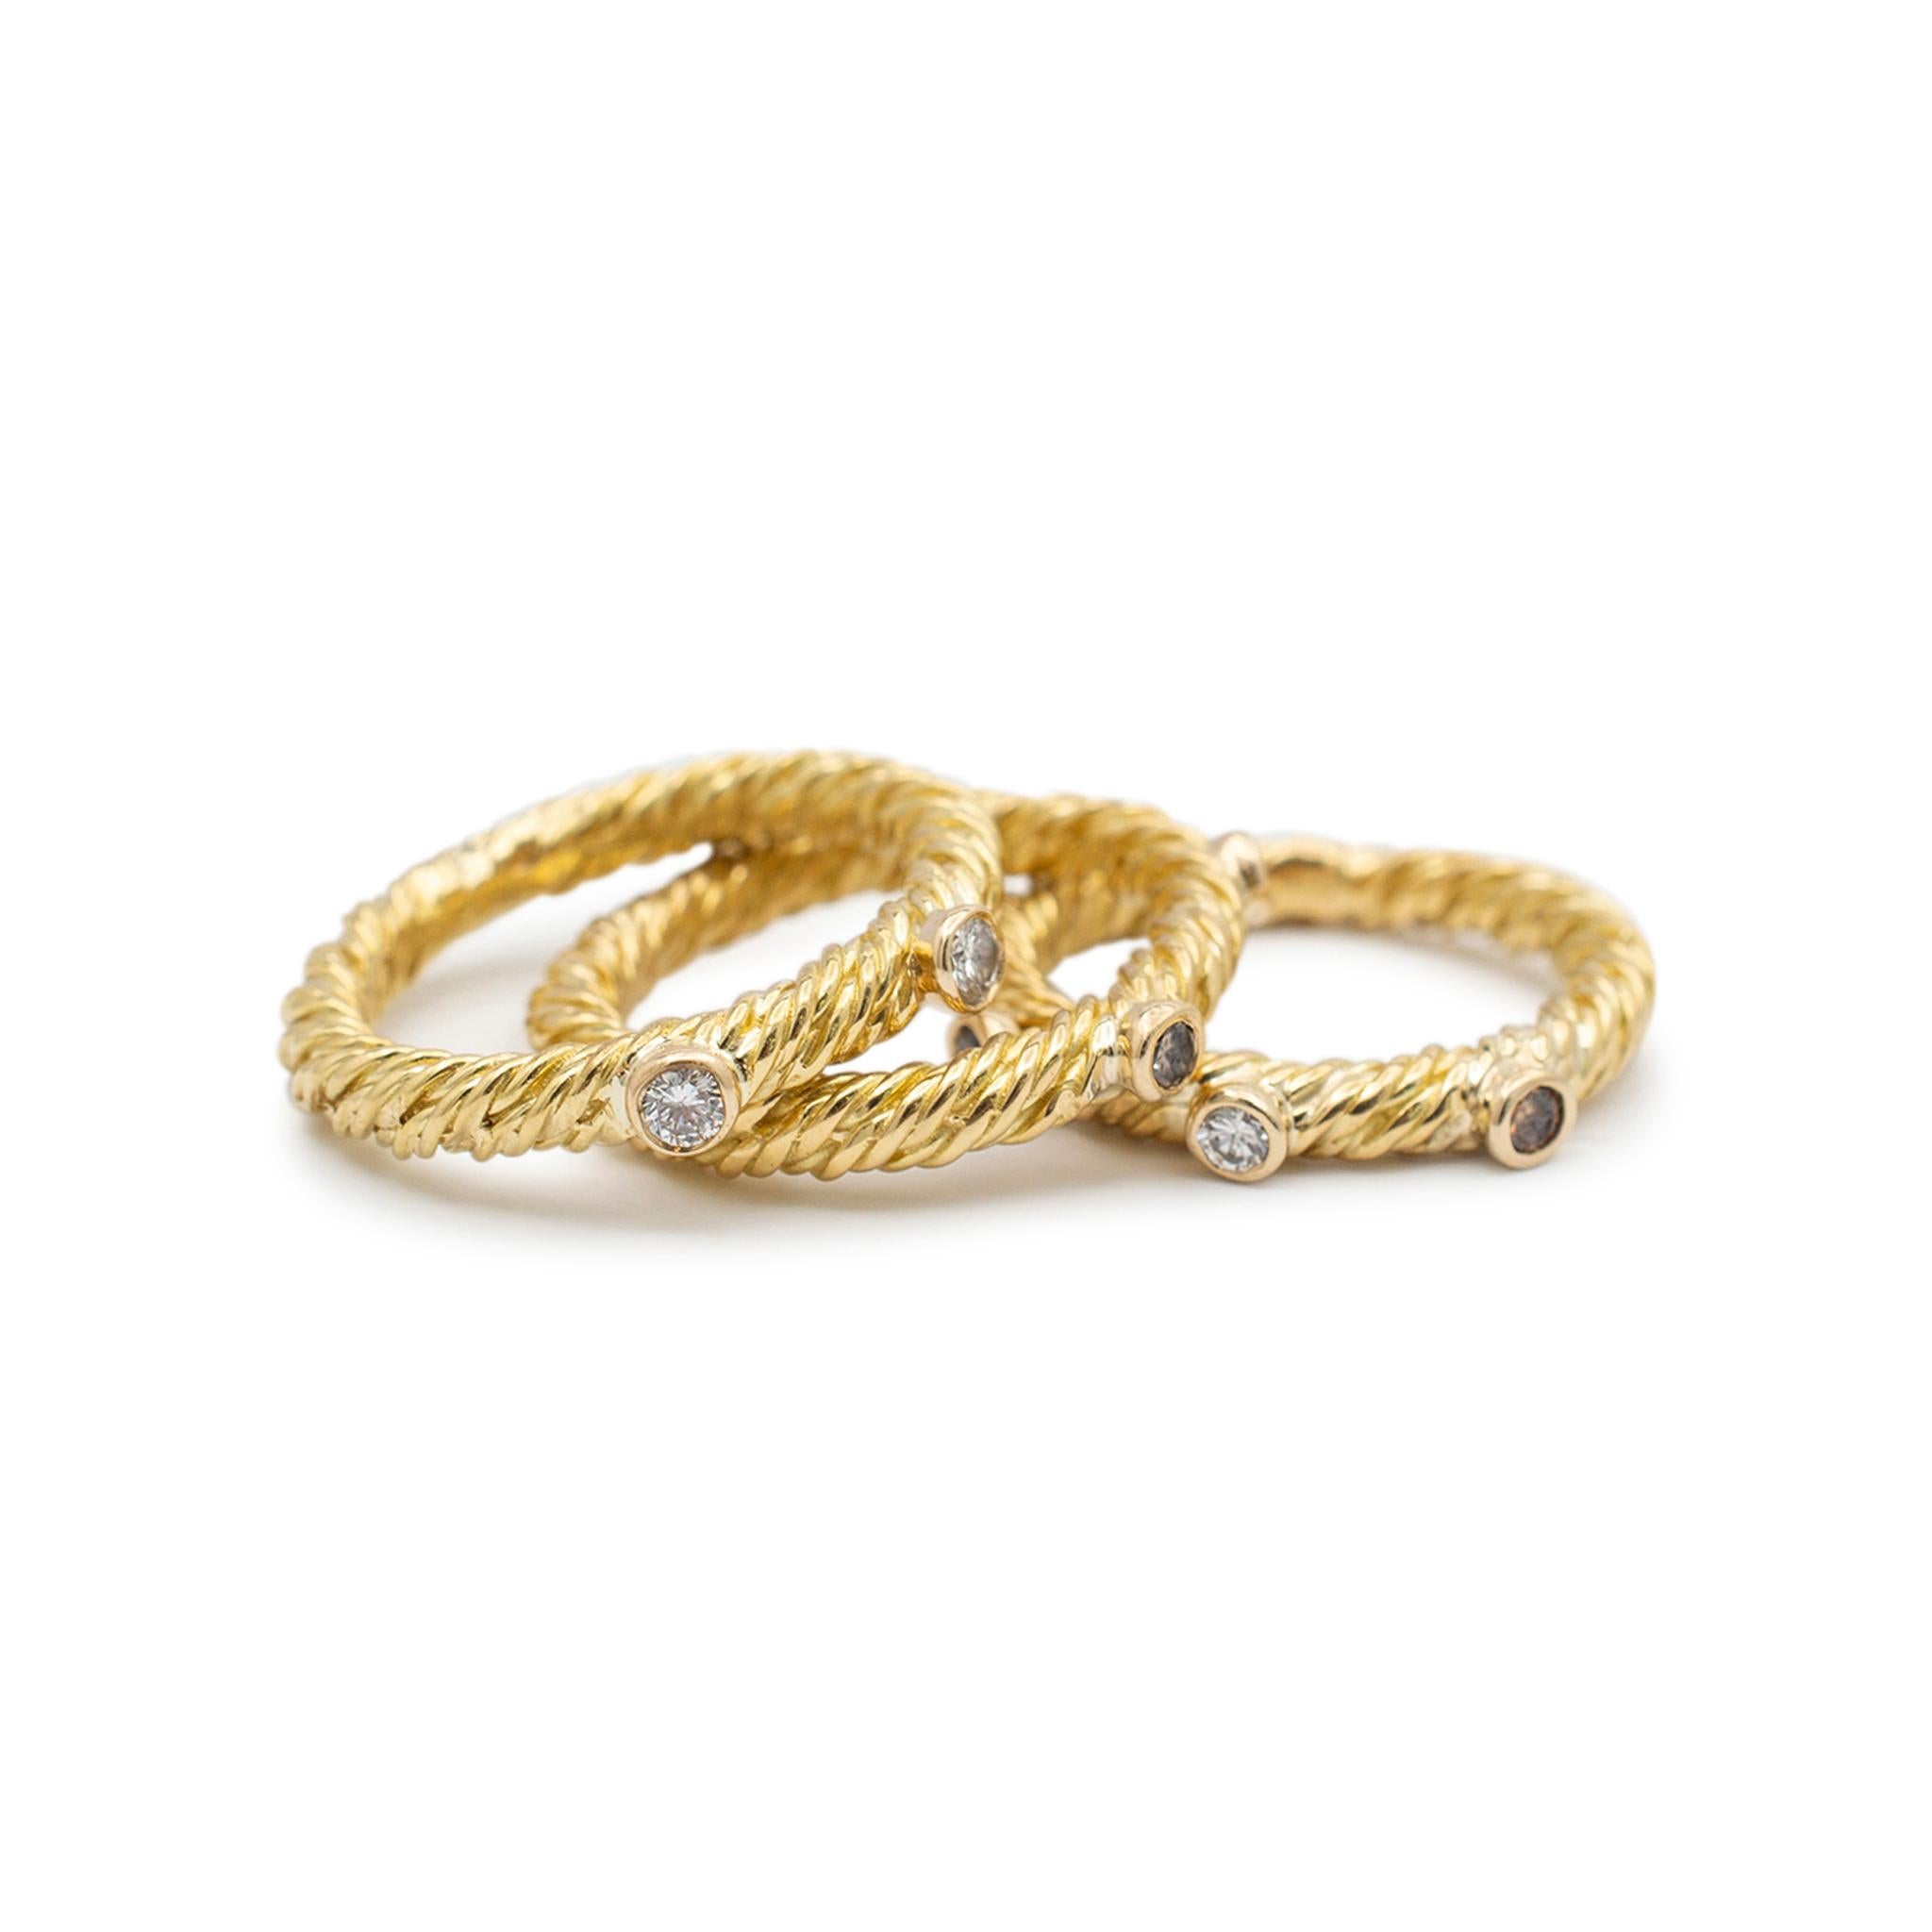 Gender: Ladies

Metal Type: 18K Yellow Gold

Size: 4

Shank Maximum Width: 2.85 mm

Weight: 12.00 grams

Three ladies 18K yellow gold diamond stackable rings with a half round shank. The metal was tested and determined to be 18K yellow